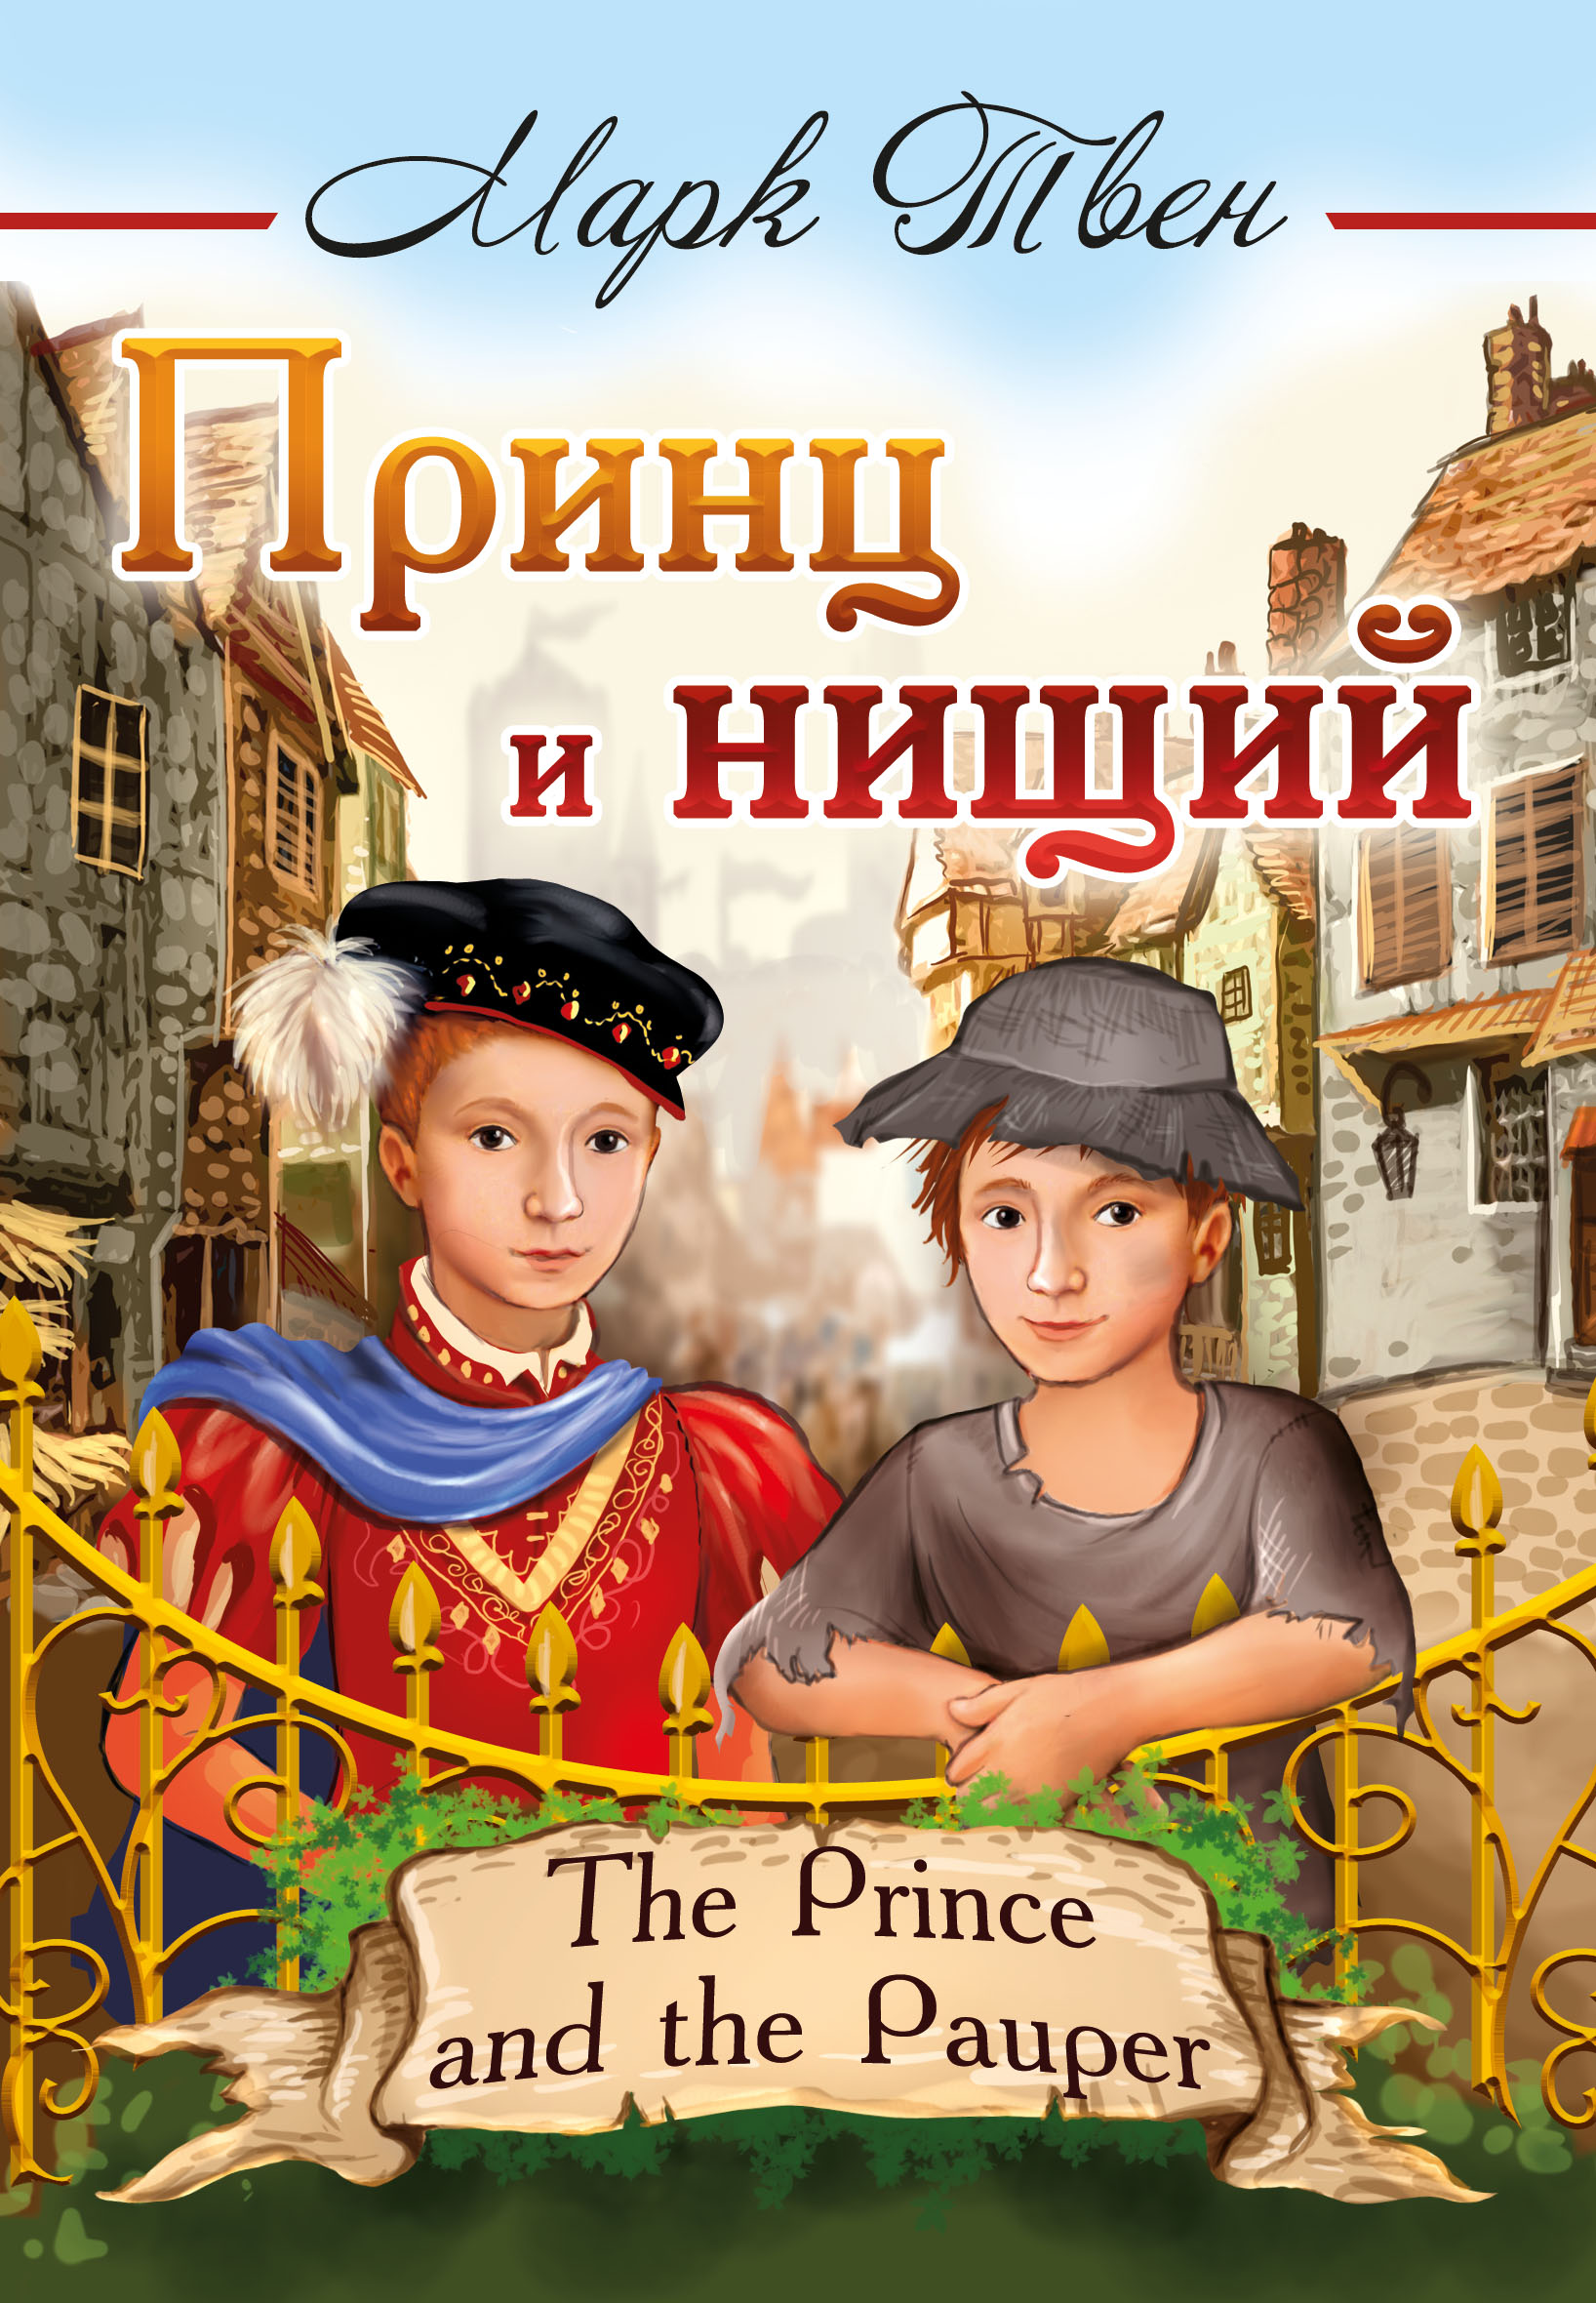    = The Prince and the Pauper